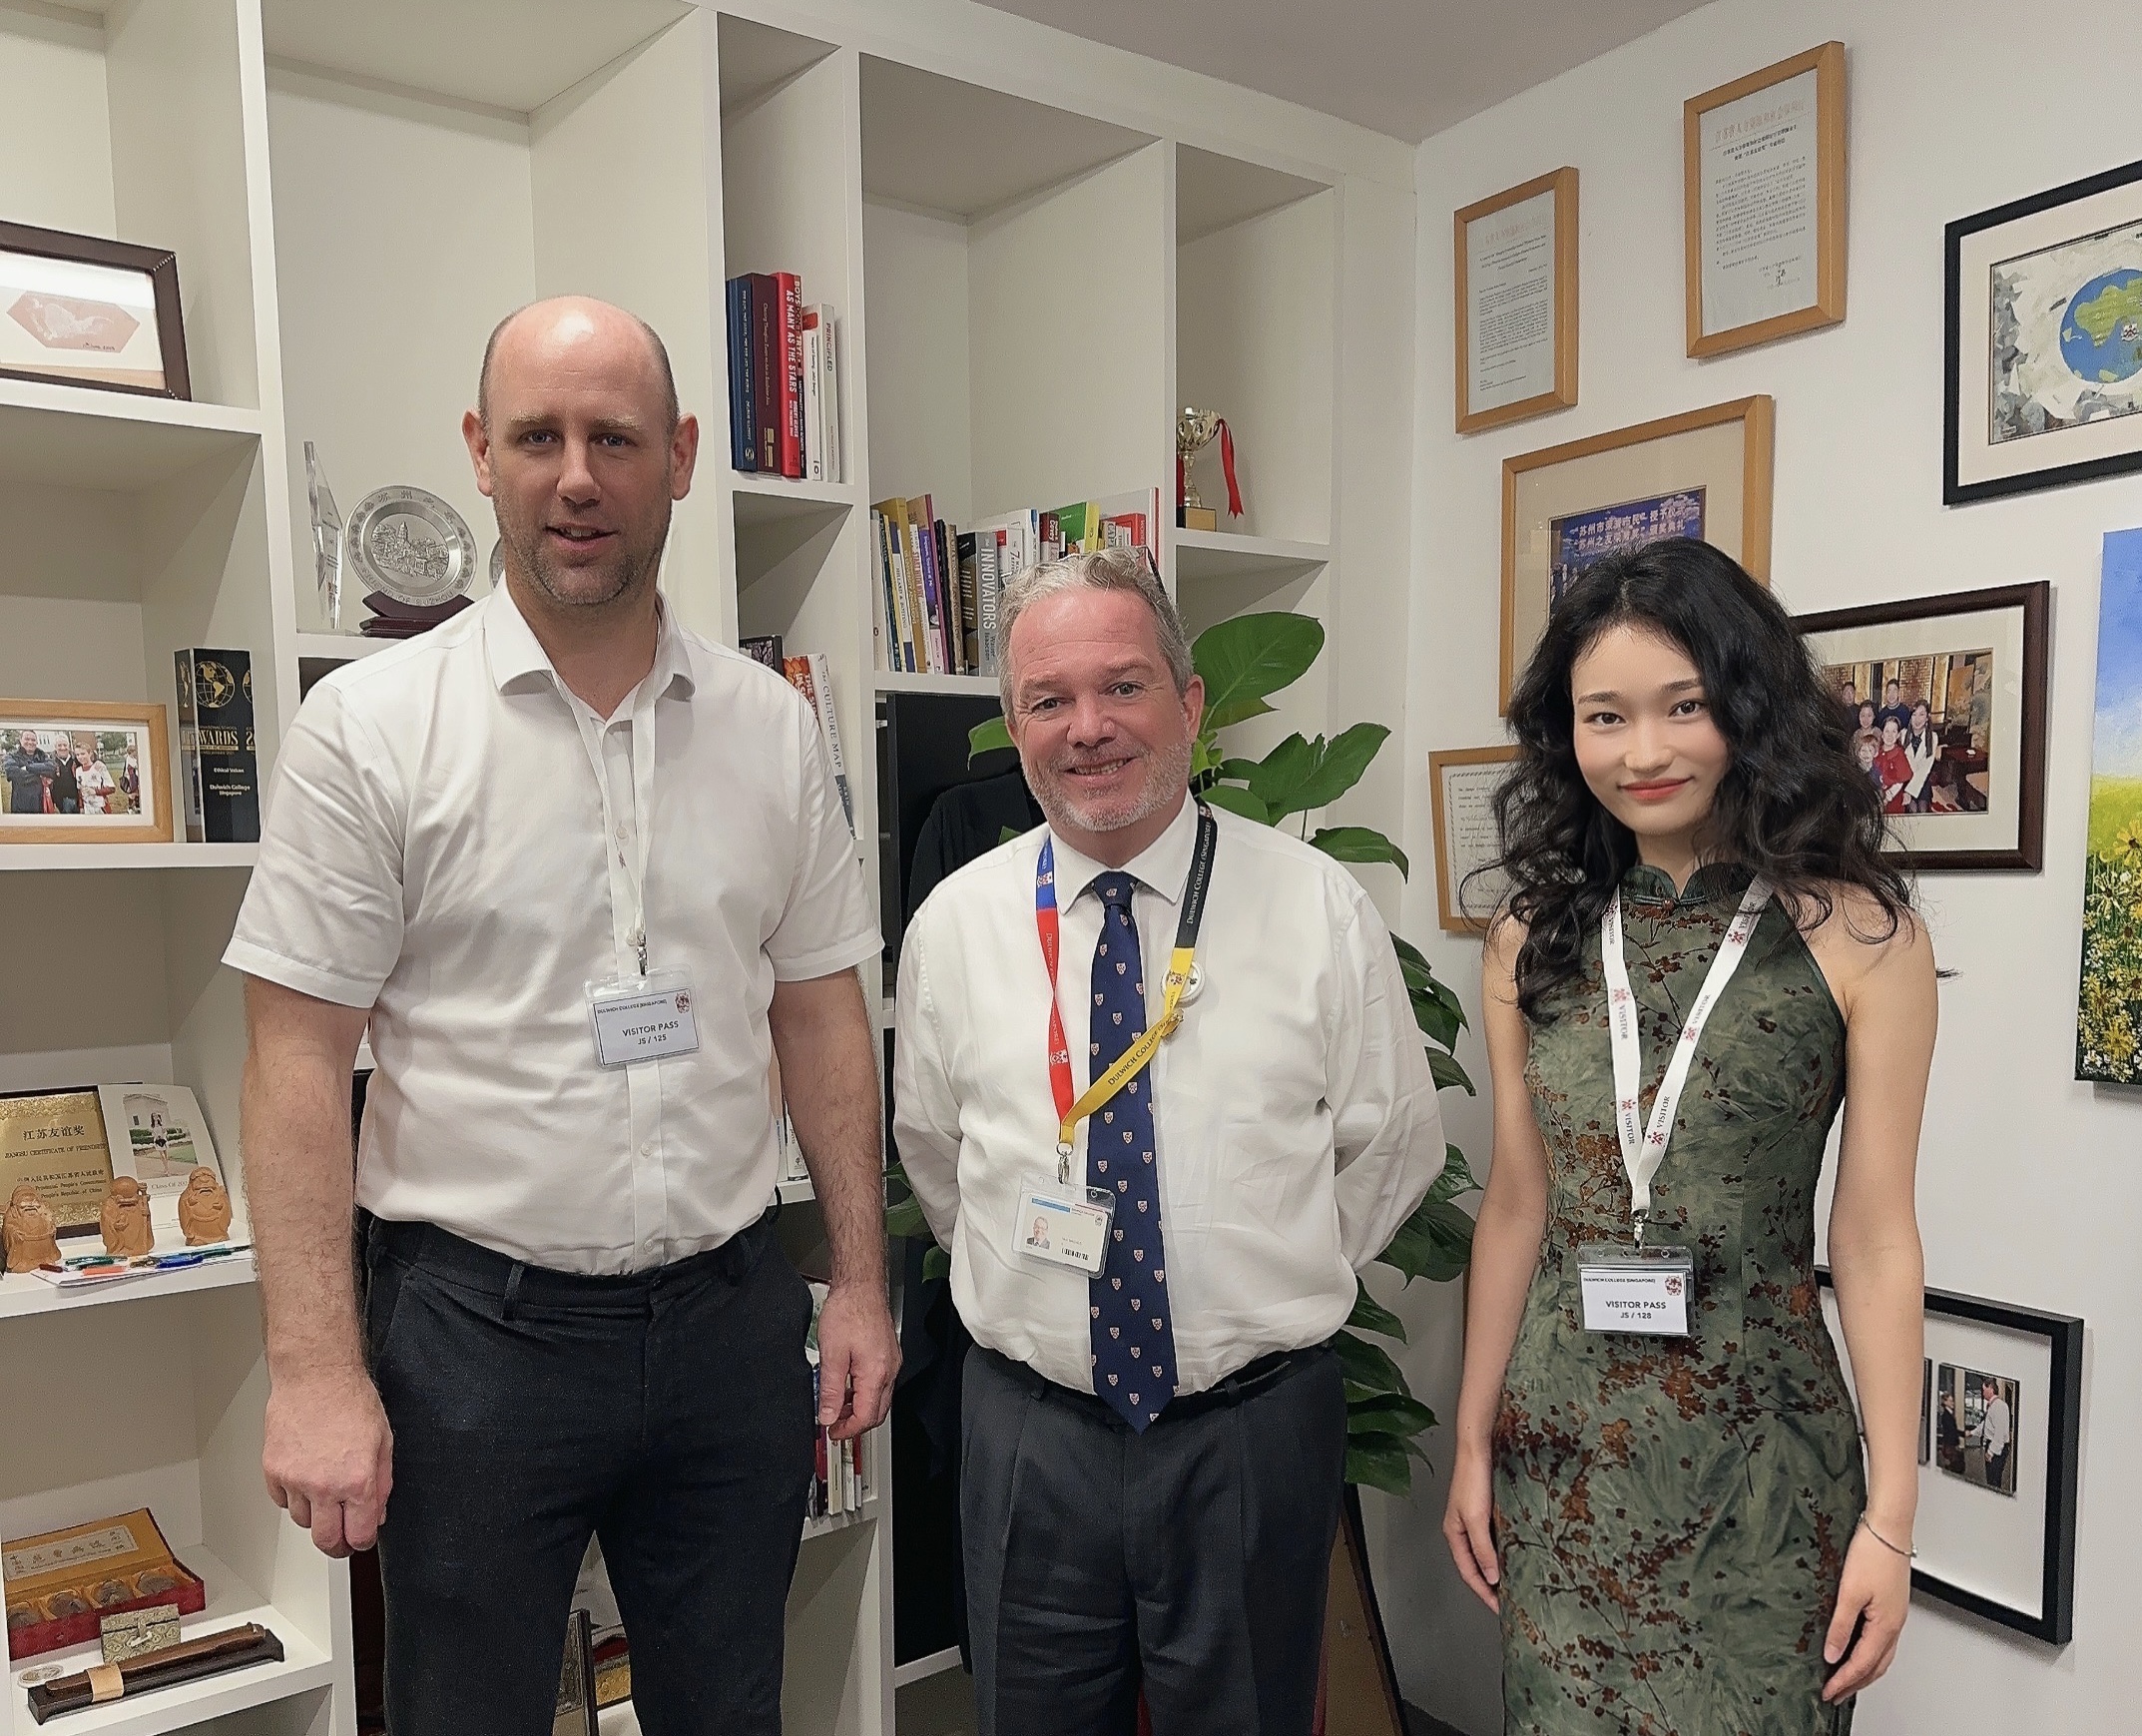 LYIS Visits Dulwich College Singapore